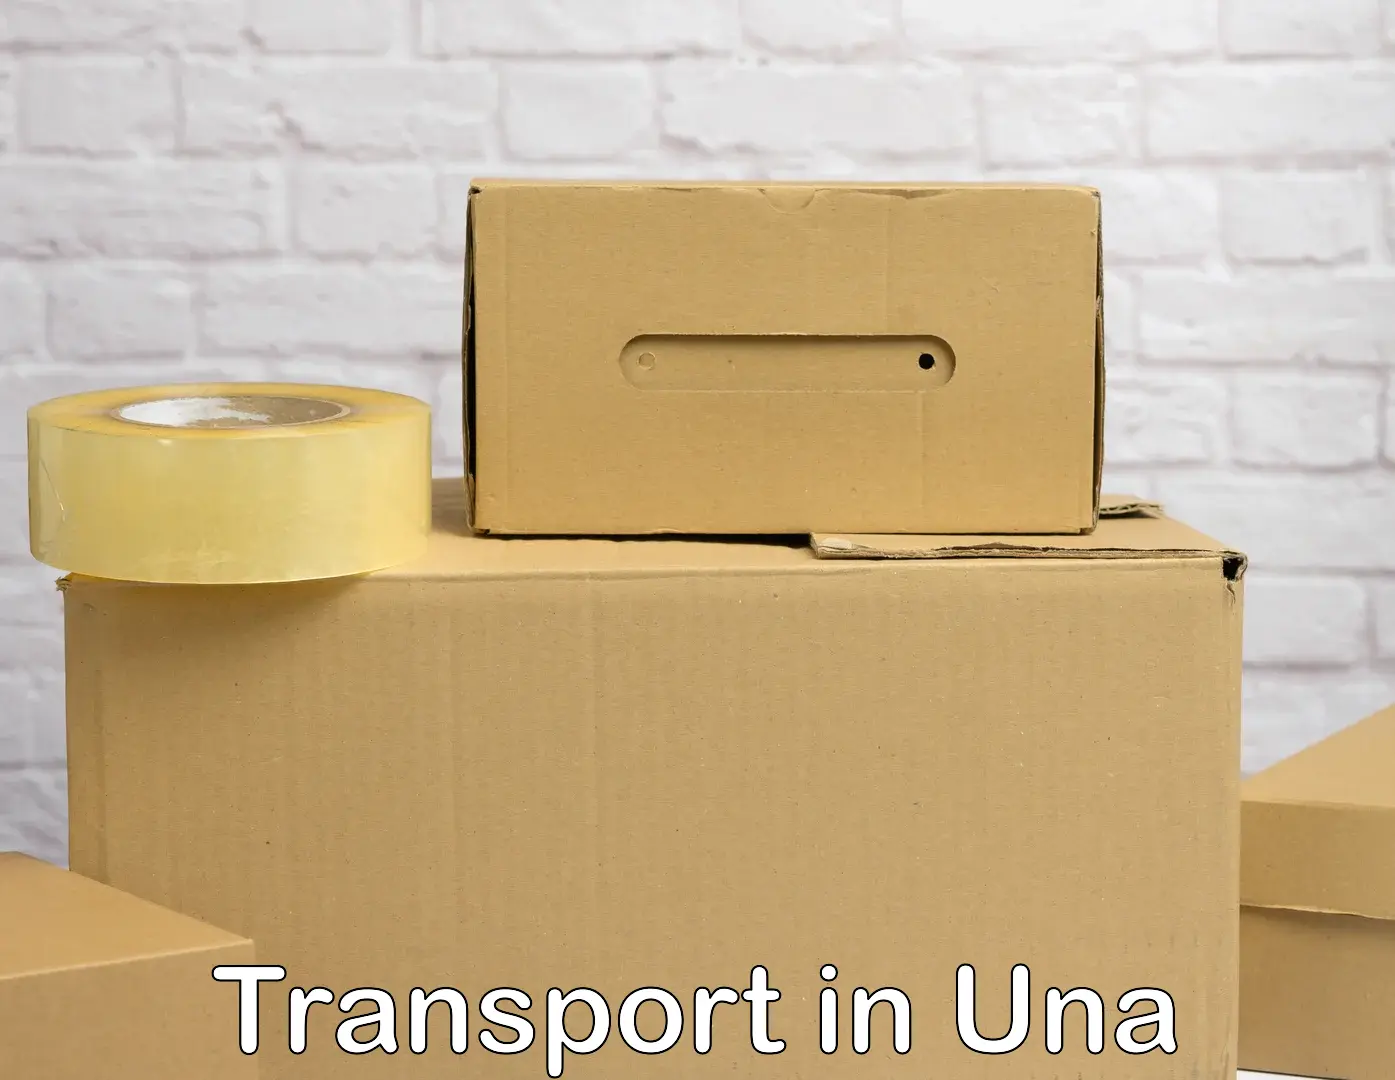 Transport shared services in Una